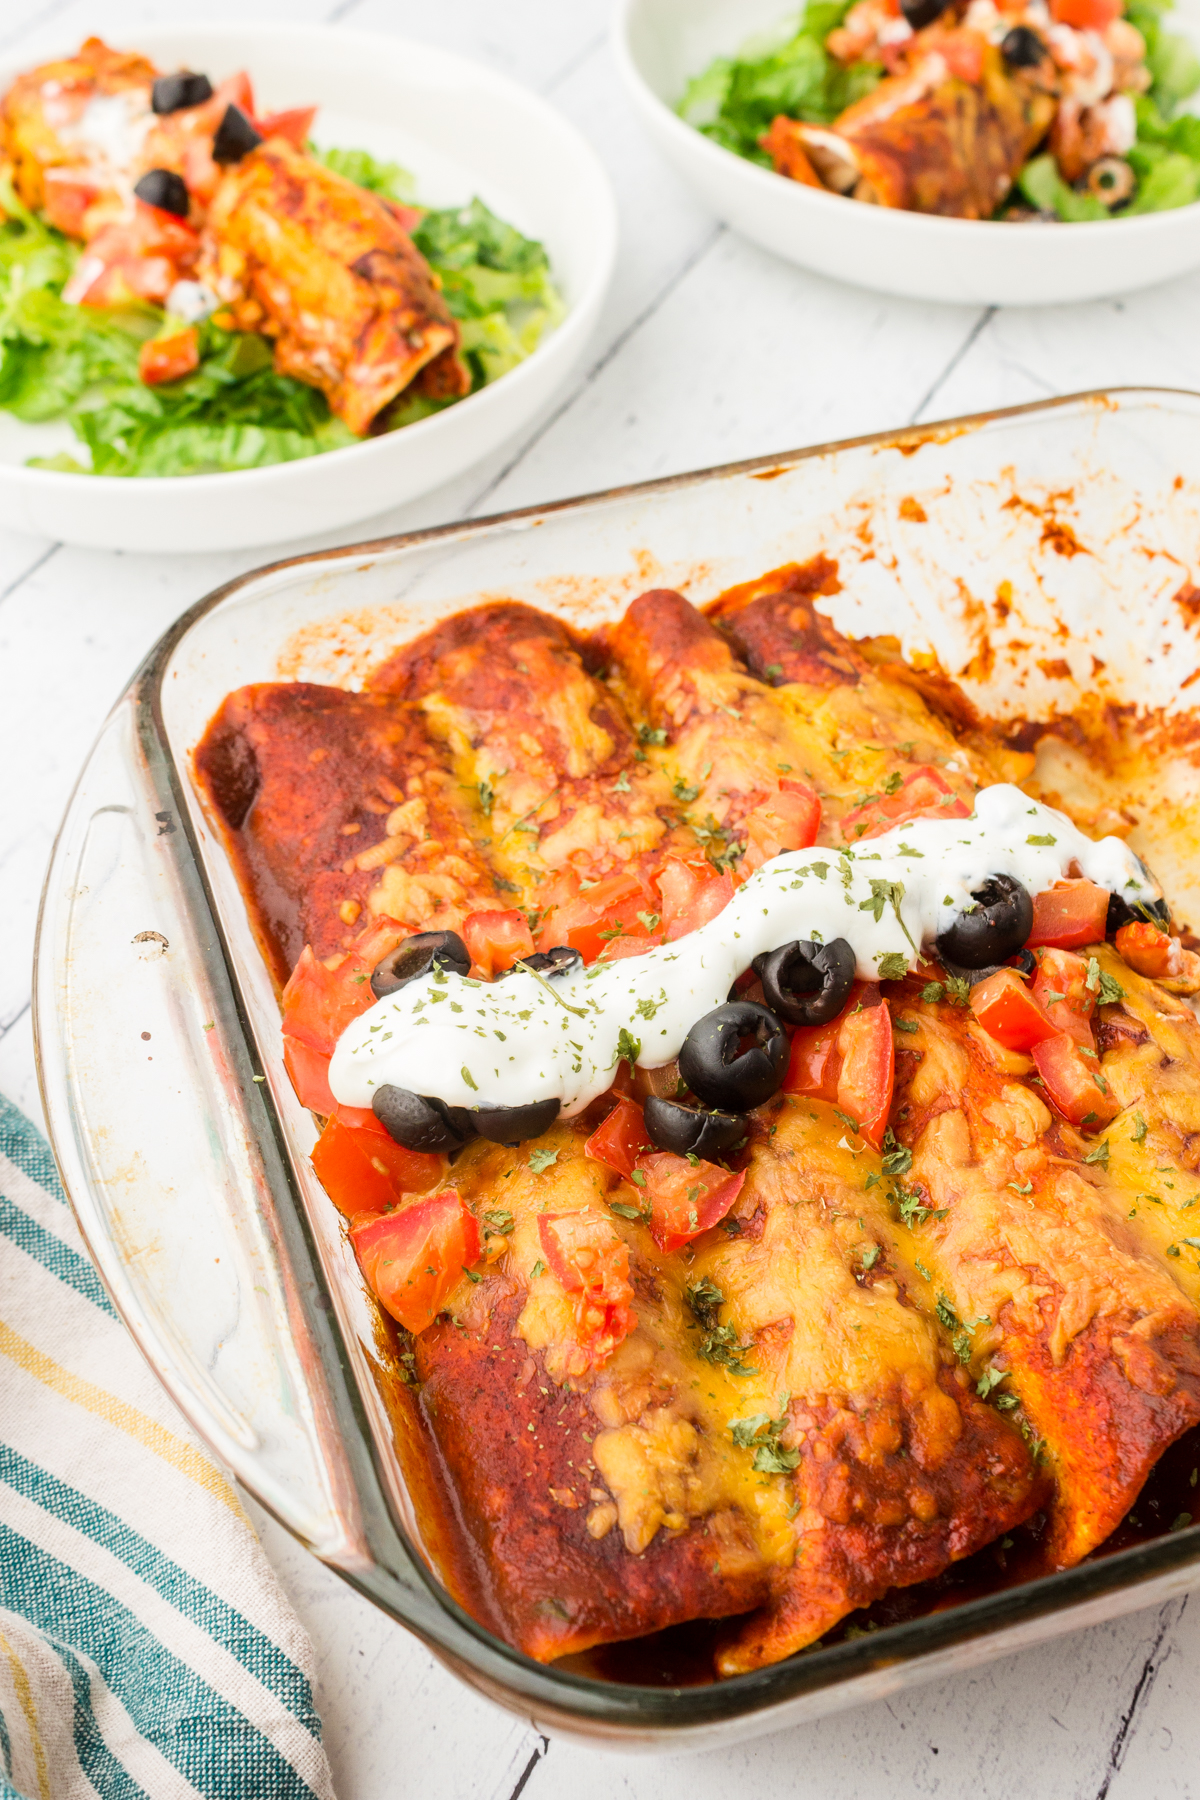 healthy chicken enchiladas served with salad greens and topped with diced tomatoes and sliced black olives